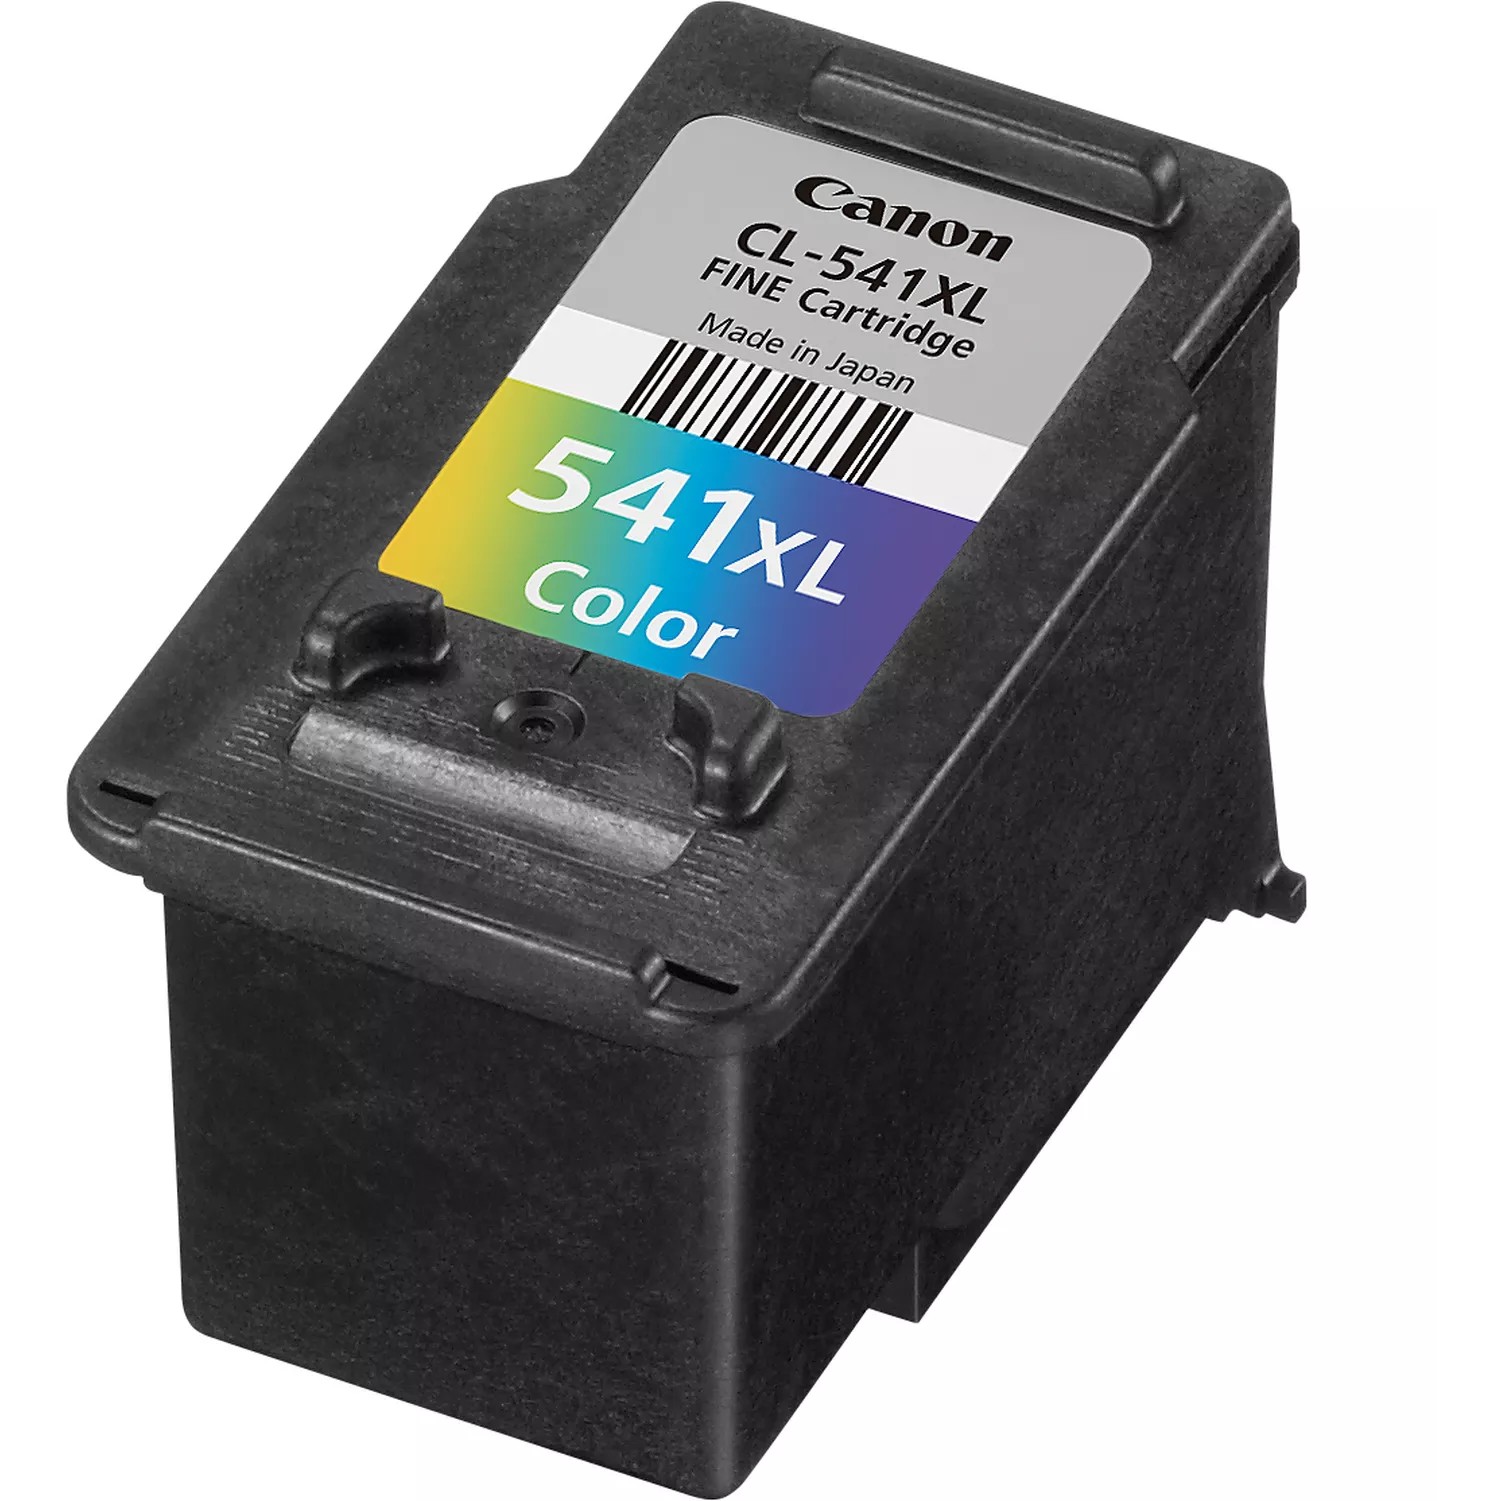 Canon CL-541XL ink cartridge